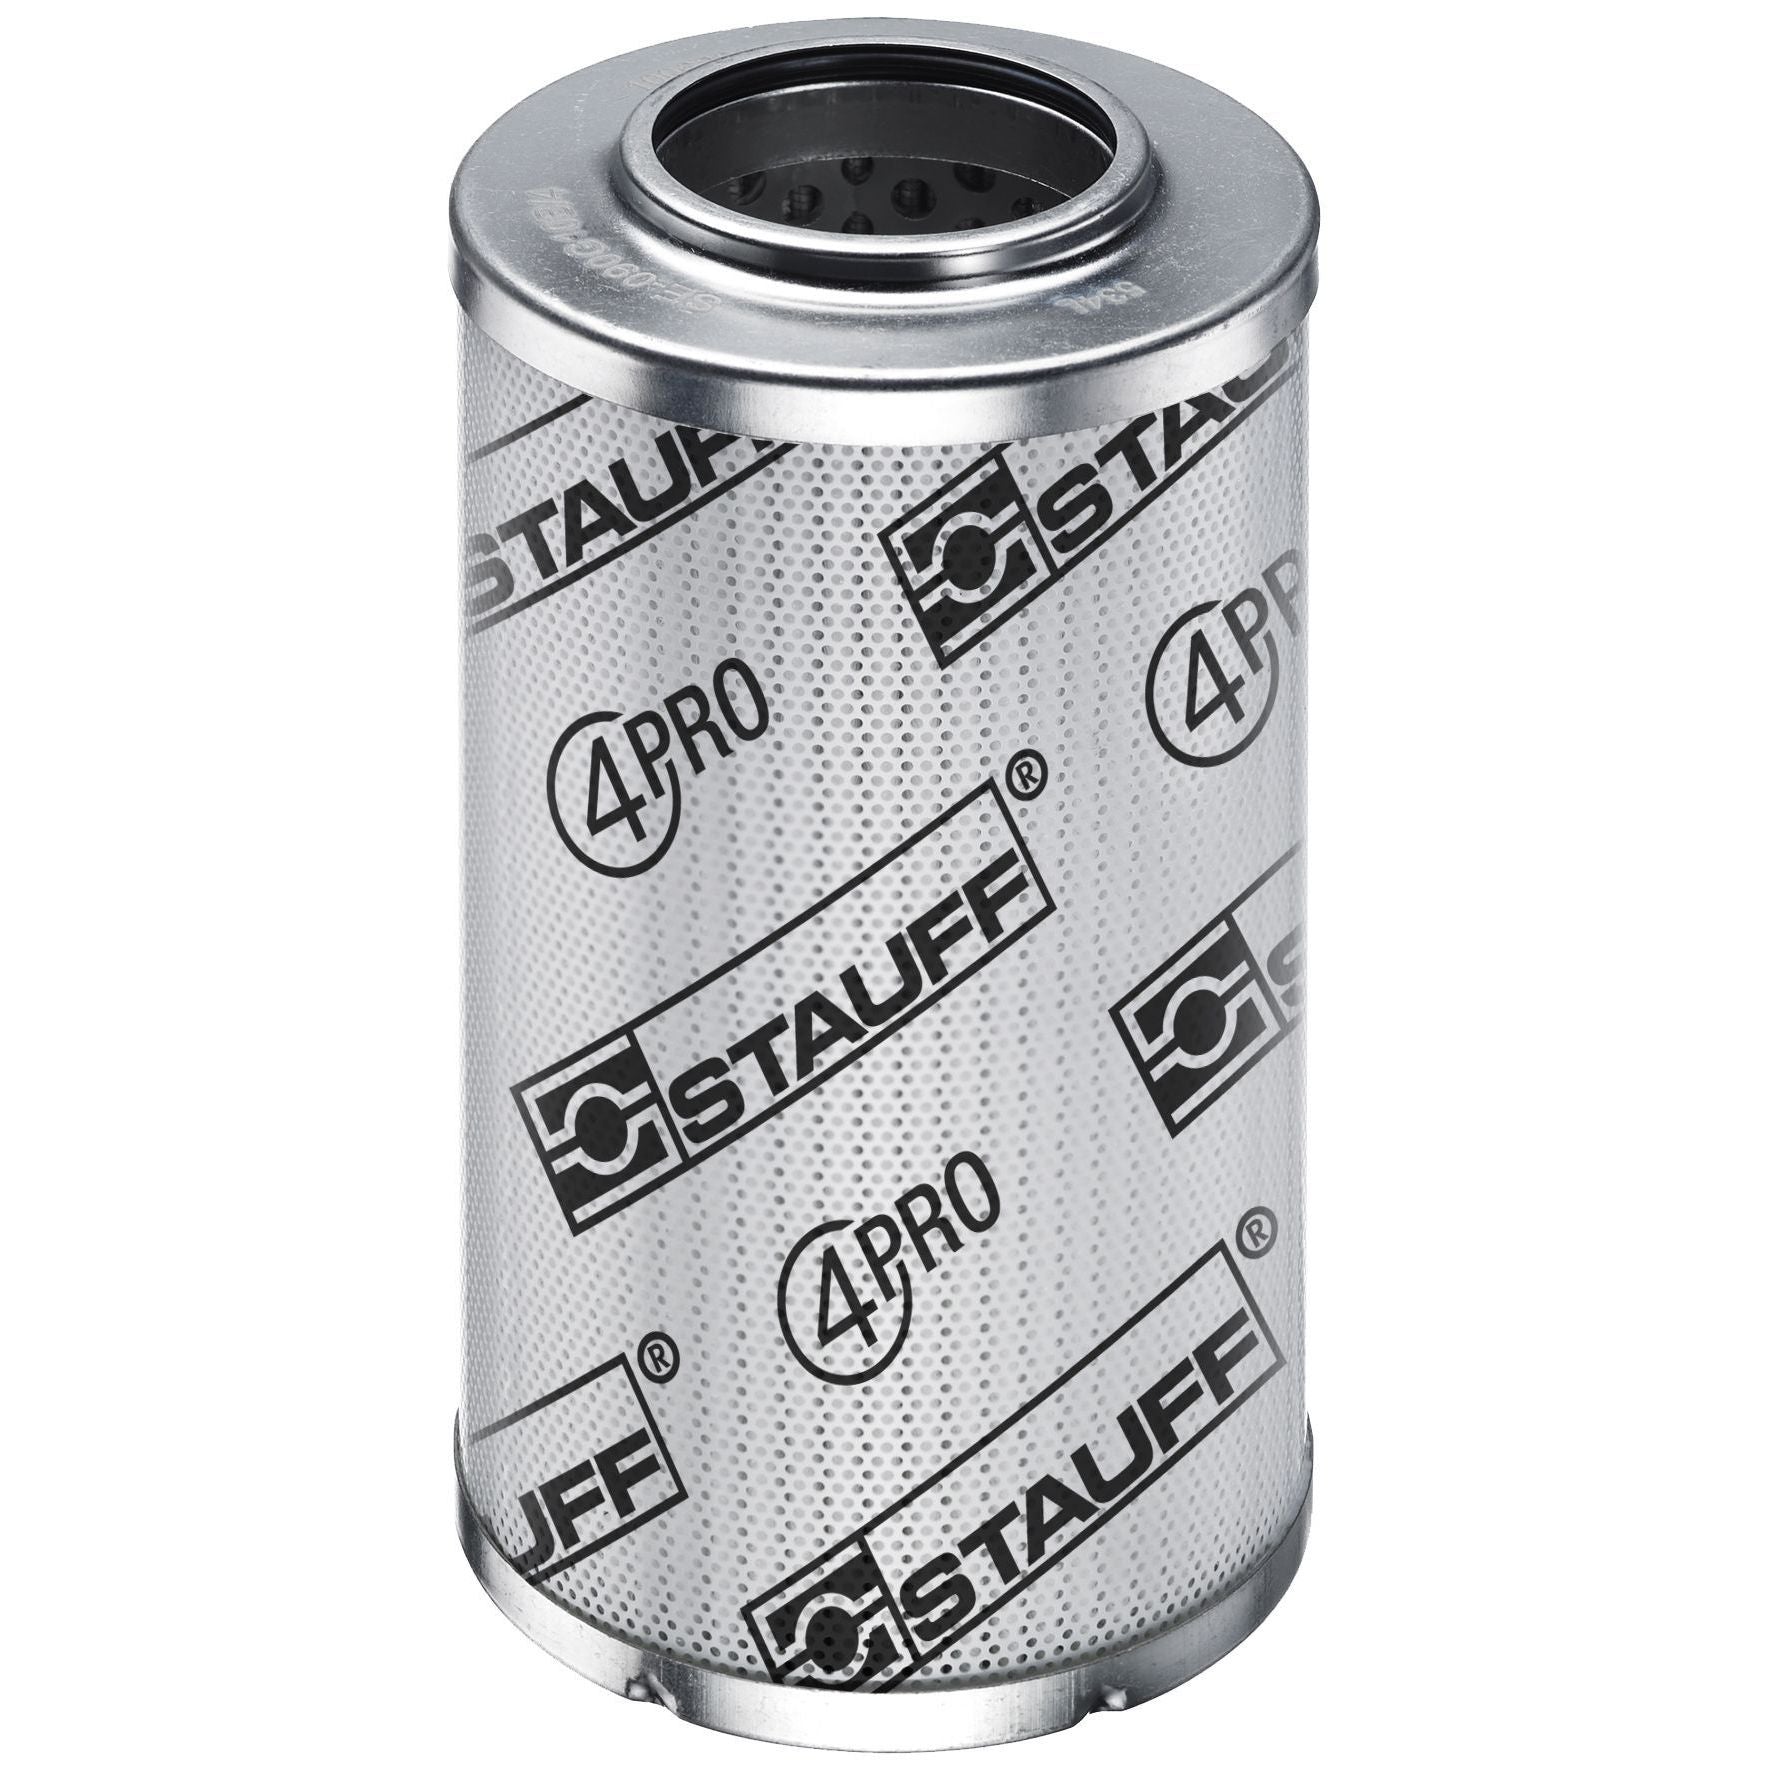 SE-014-G-10-B/4 : Stauff SF-014 Series Filter Element, 10 Micron, Synthetic, 363psi Collapse Differential, Buna